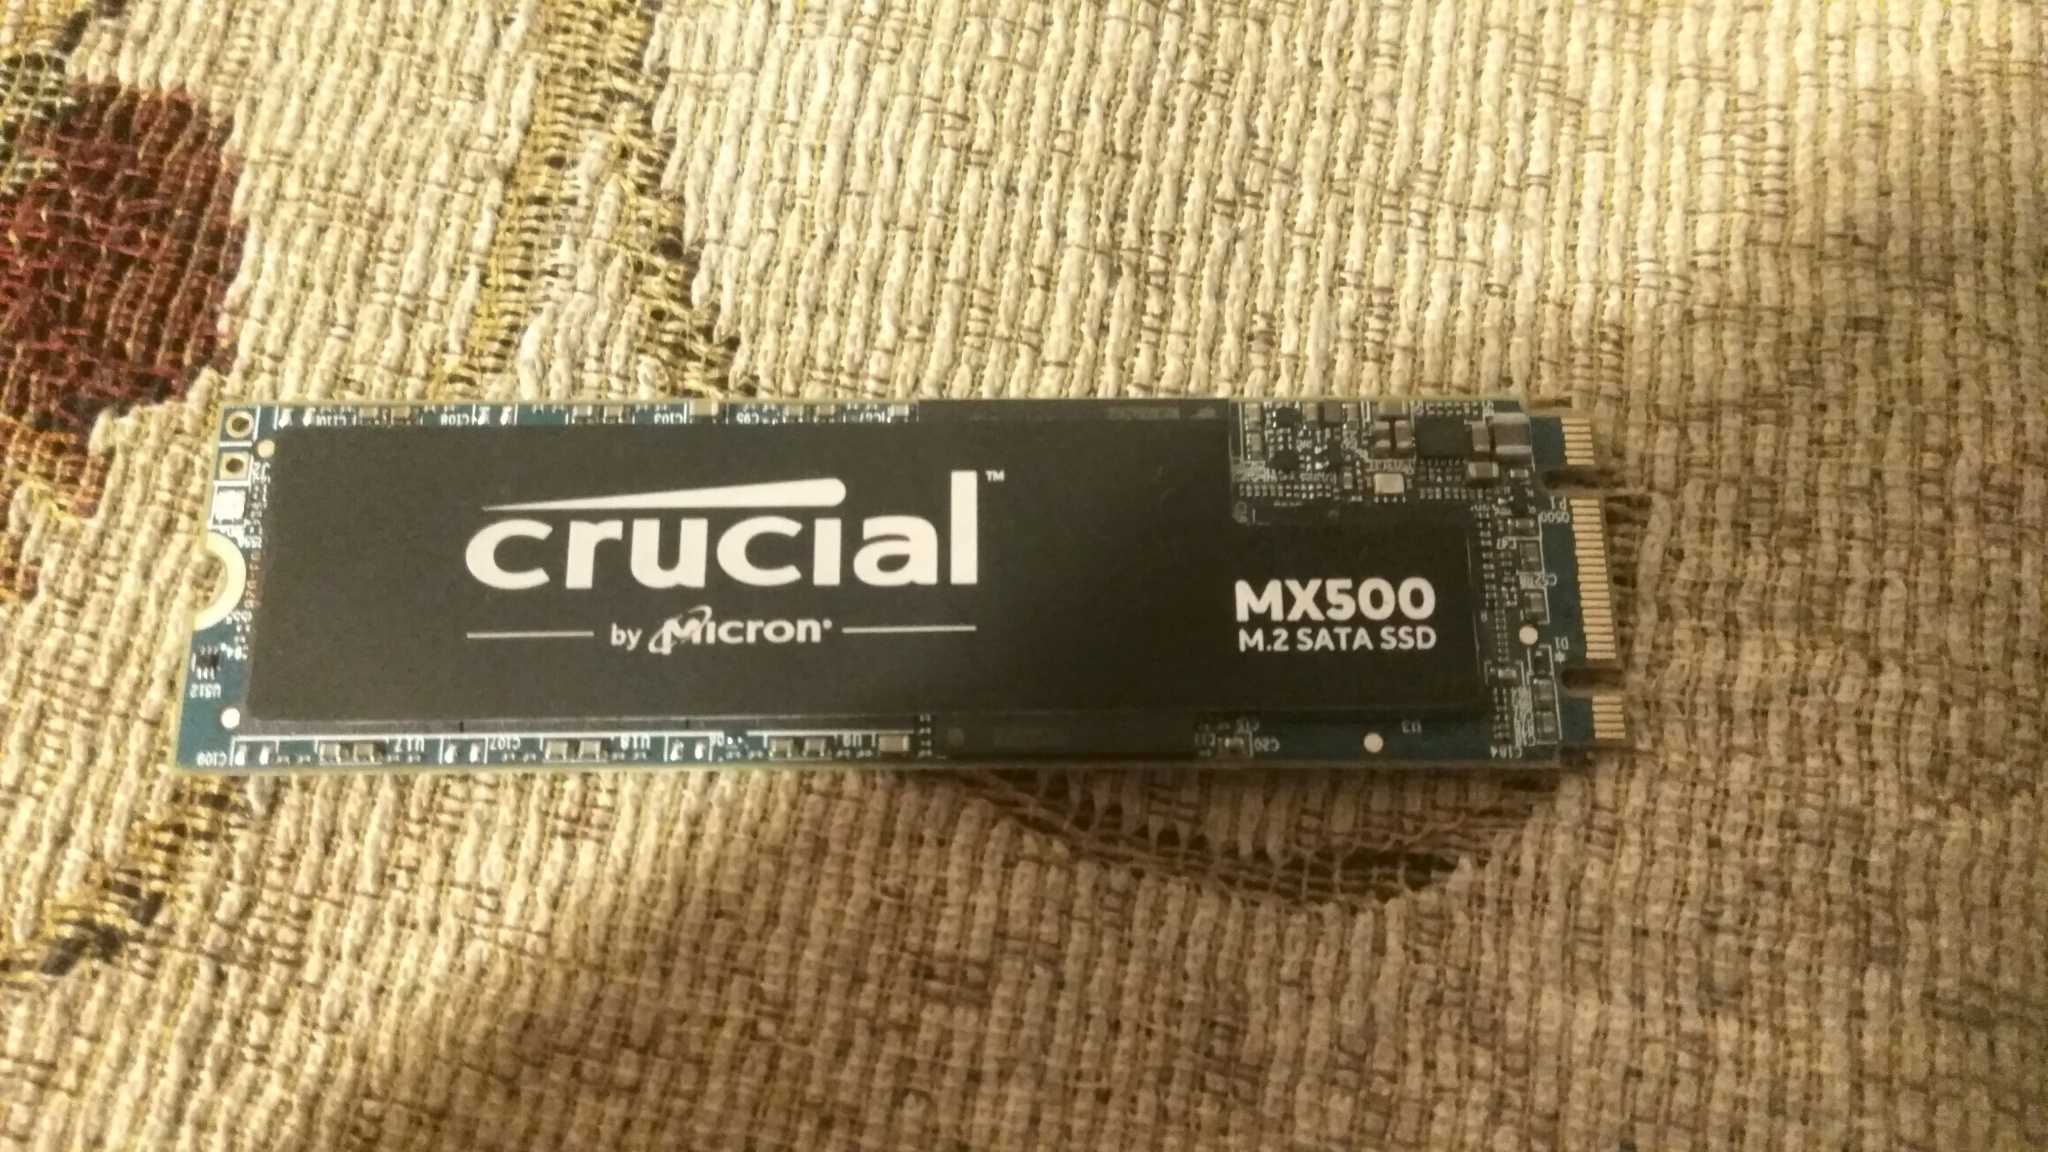 Crucial mx500 ssd review - tom's hardware | tom's hardware